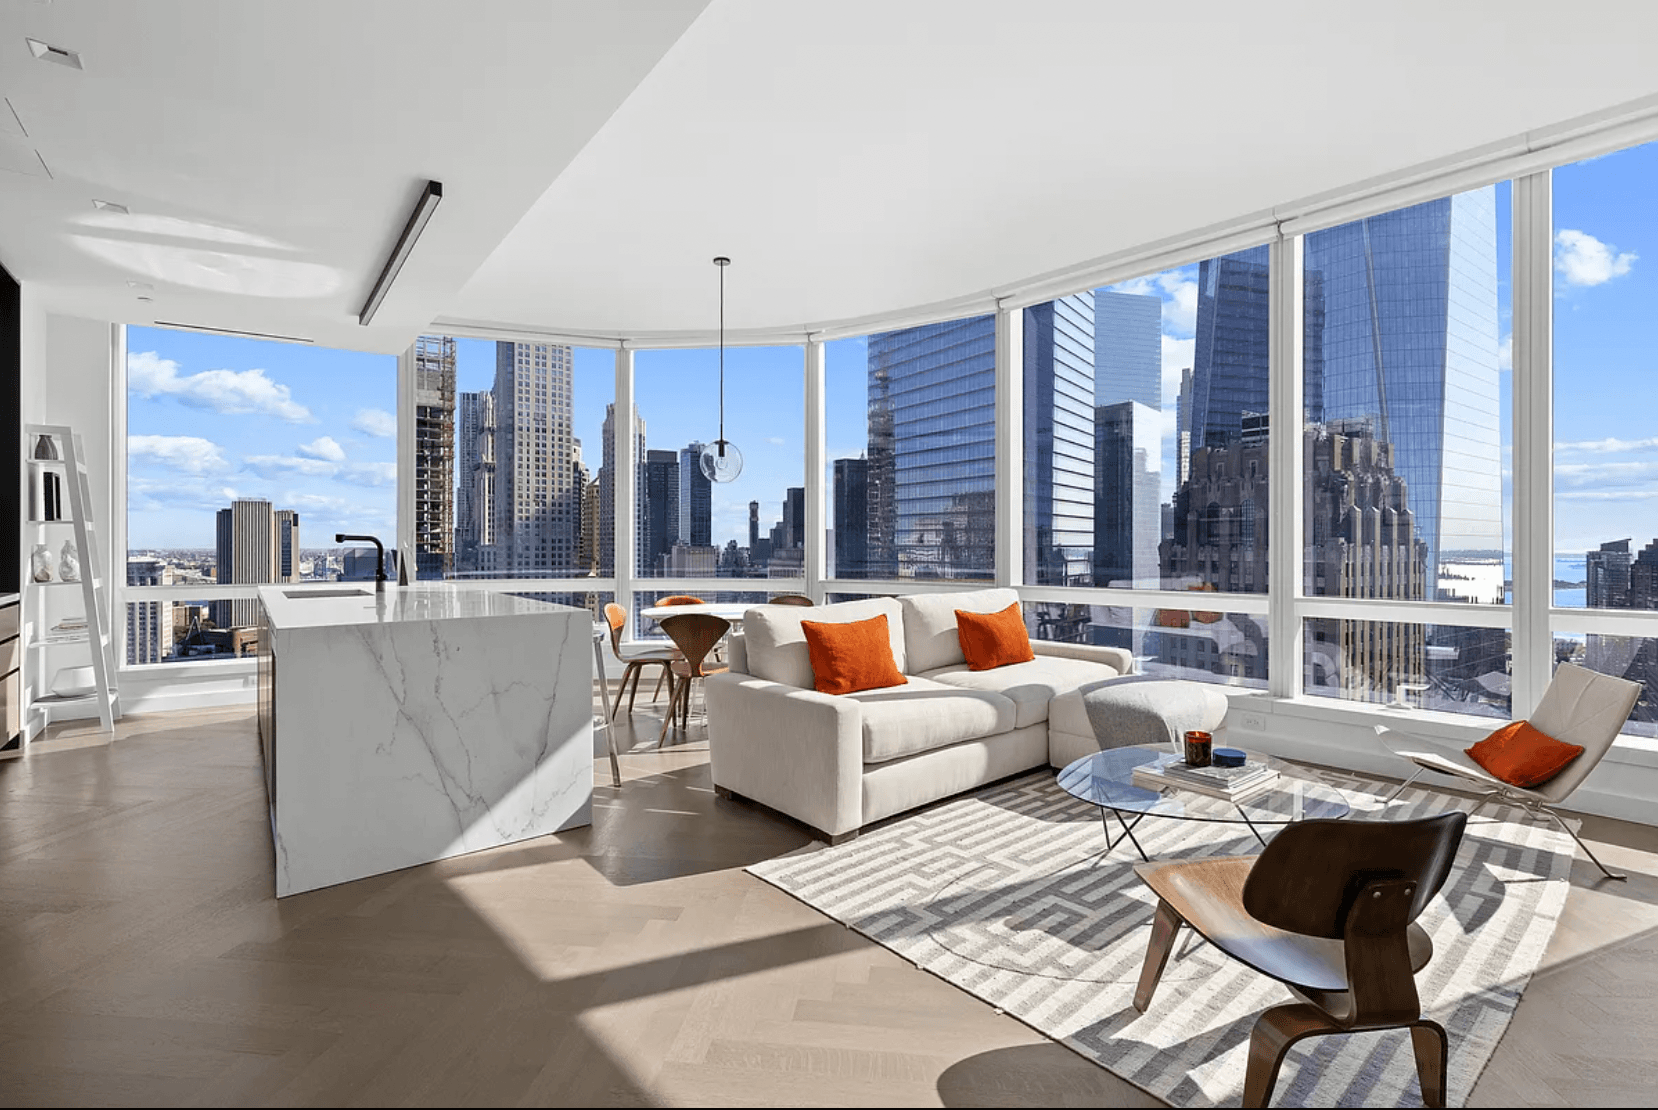 Rare Split 2 Bedroom Enclave Layout in the Famed 111 Murray Tribeca Condominium